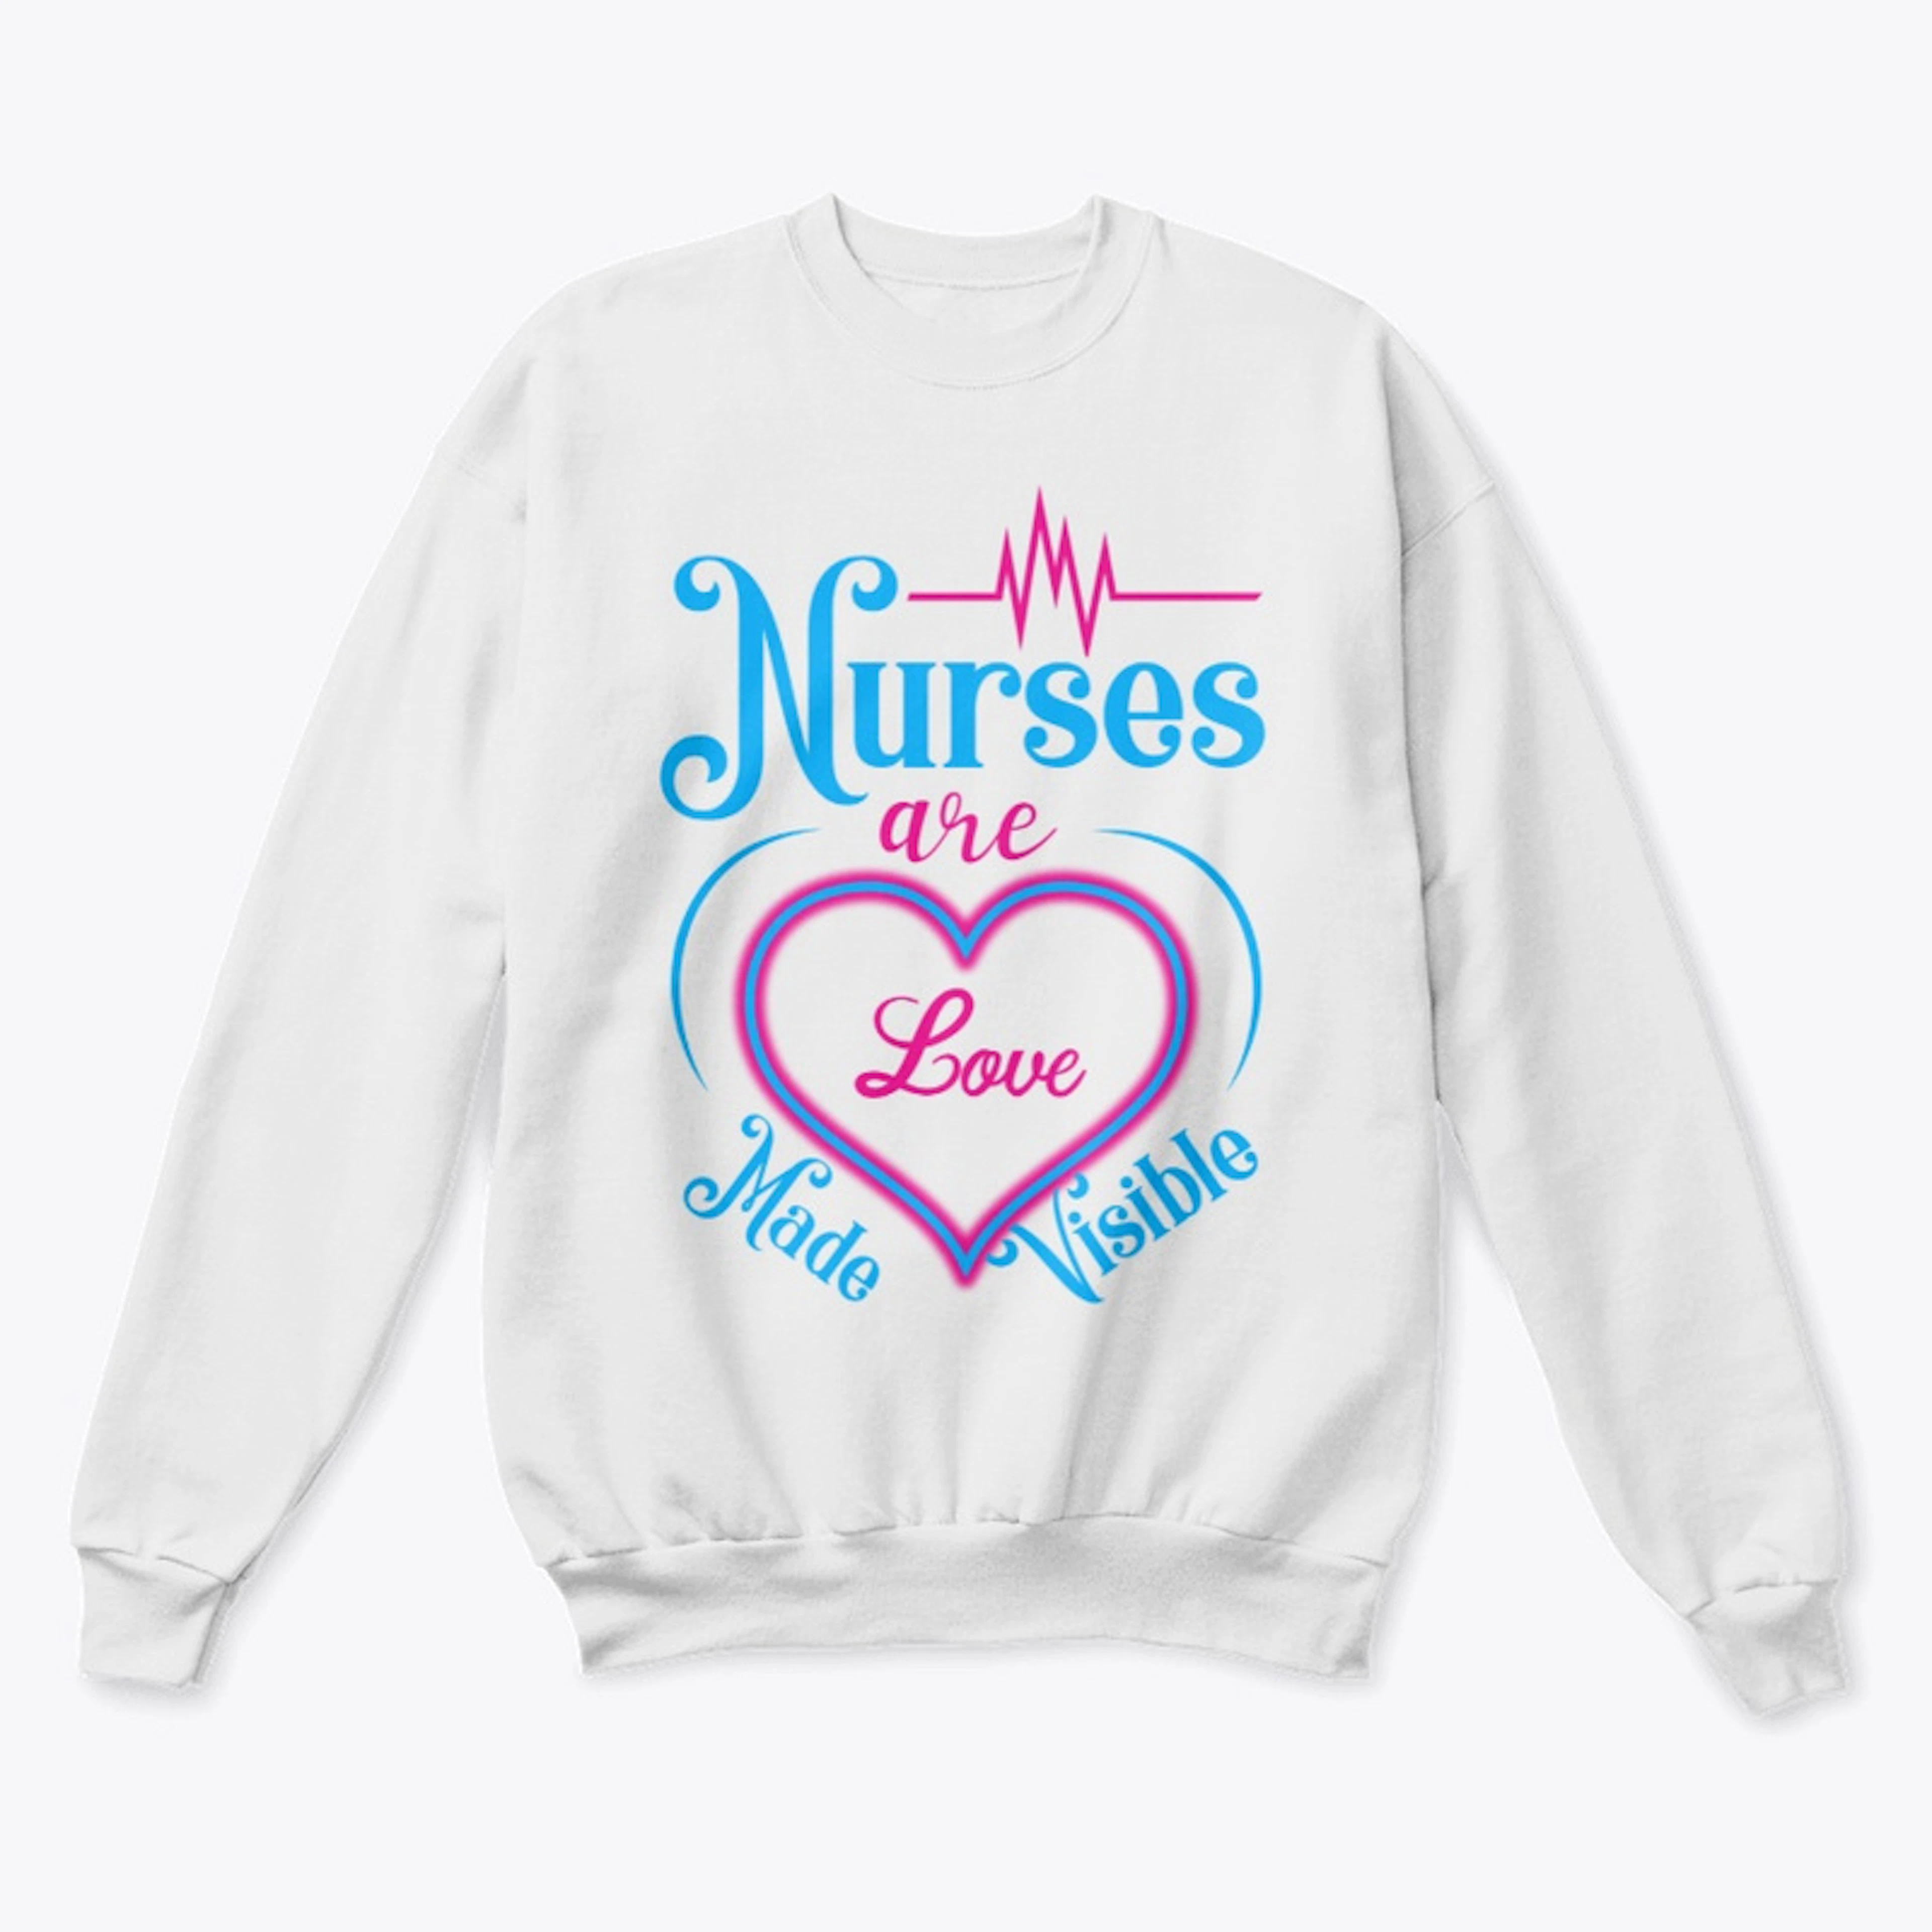 Nurses are Love Made Visible